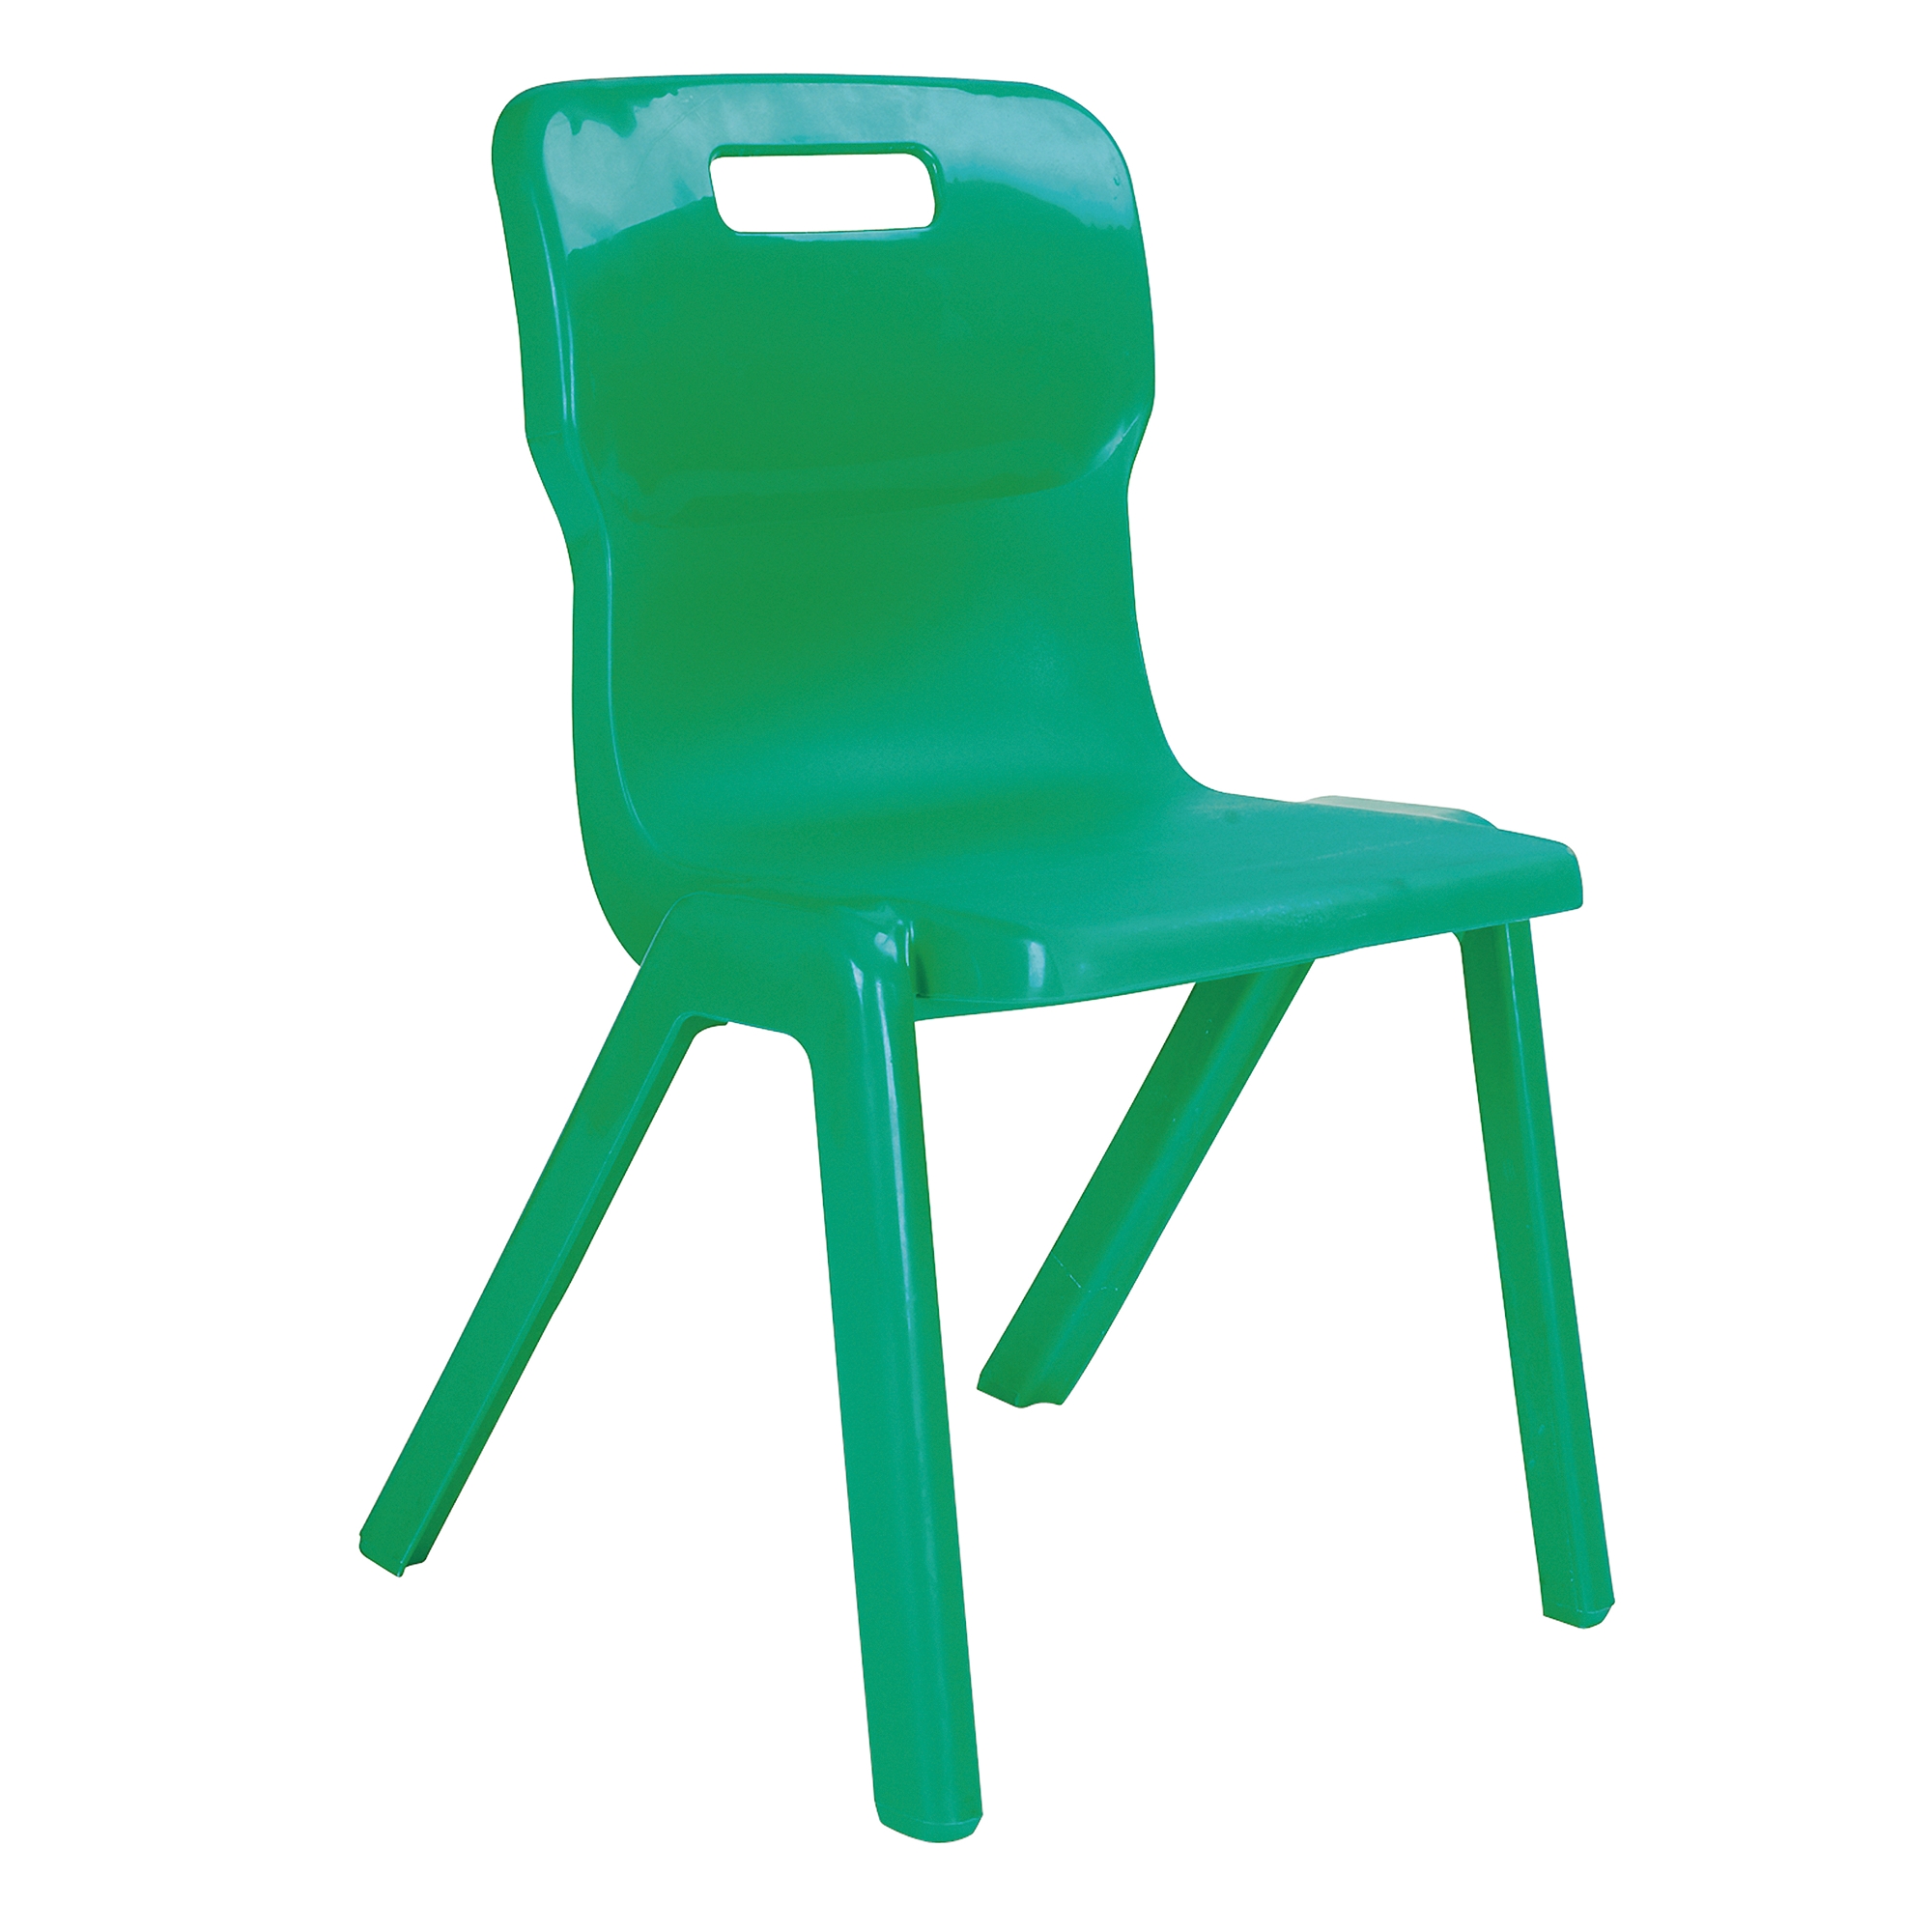 One Piece Titan Chair - Size 5 Ages 11-14 Green